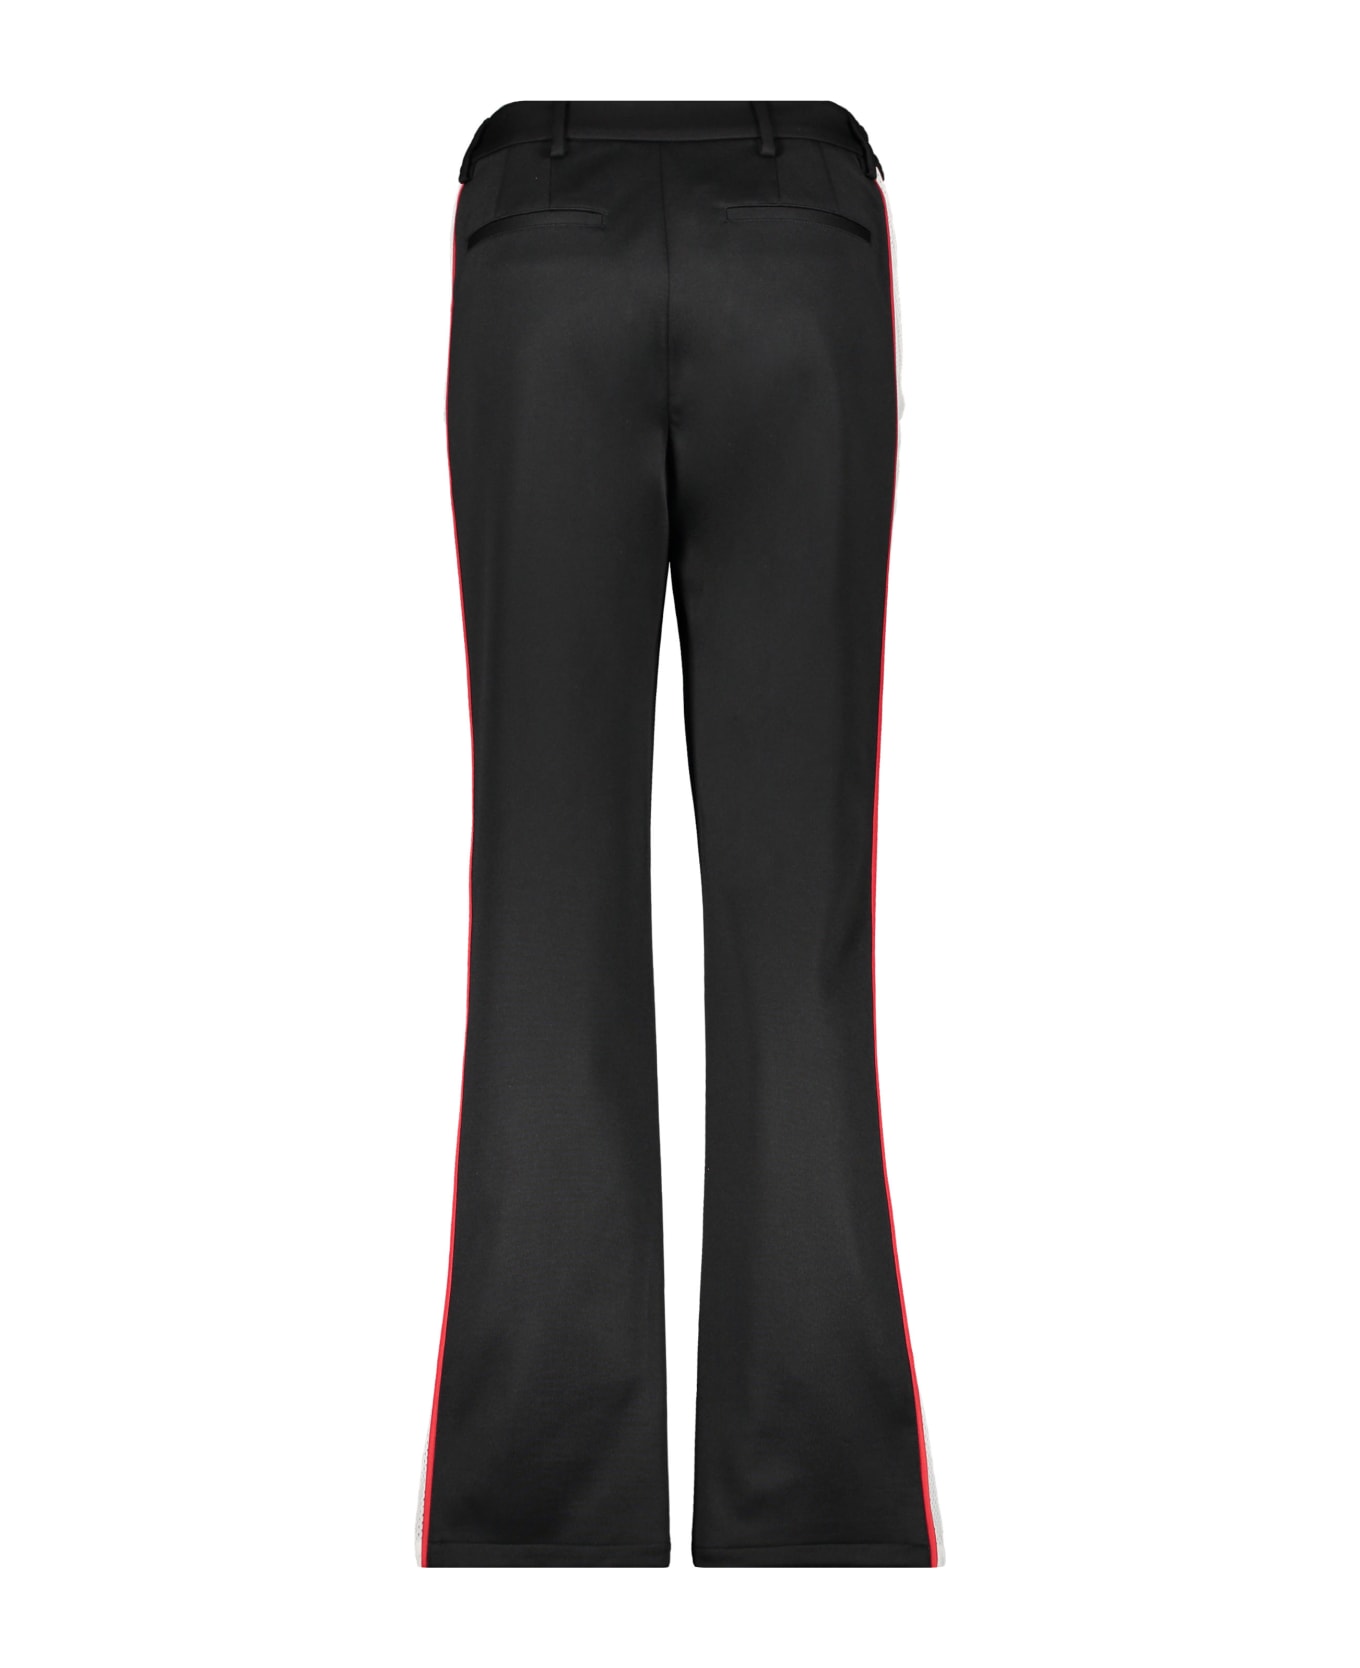 Burberry Contrast Side Stripes Trousers - black ボトムス